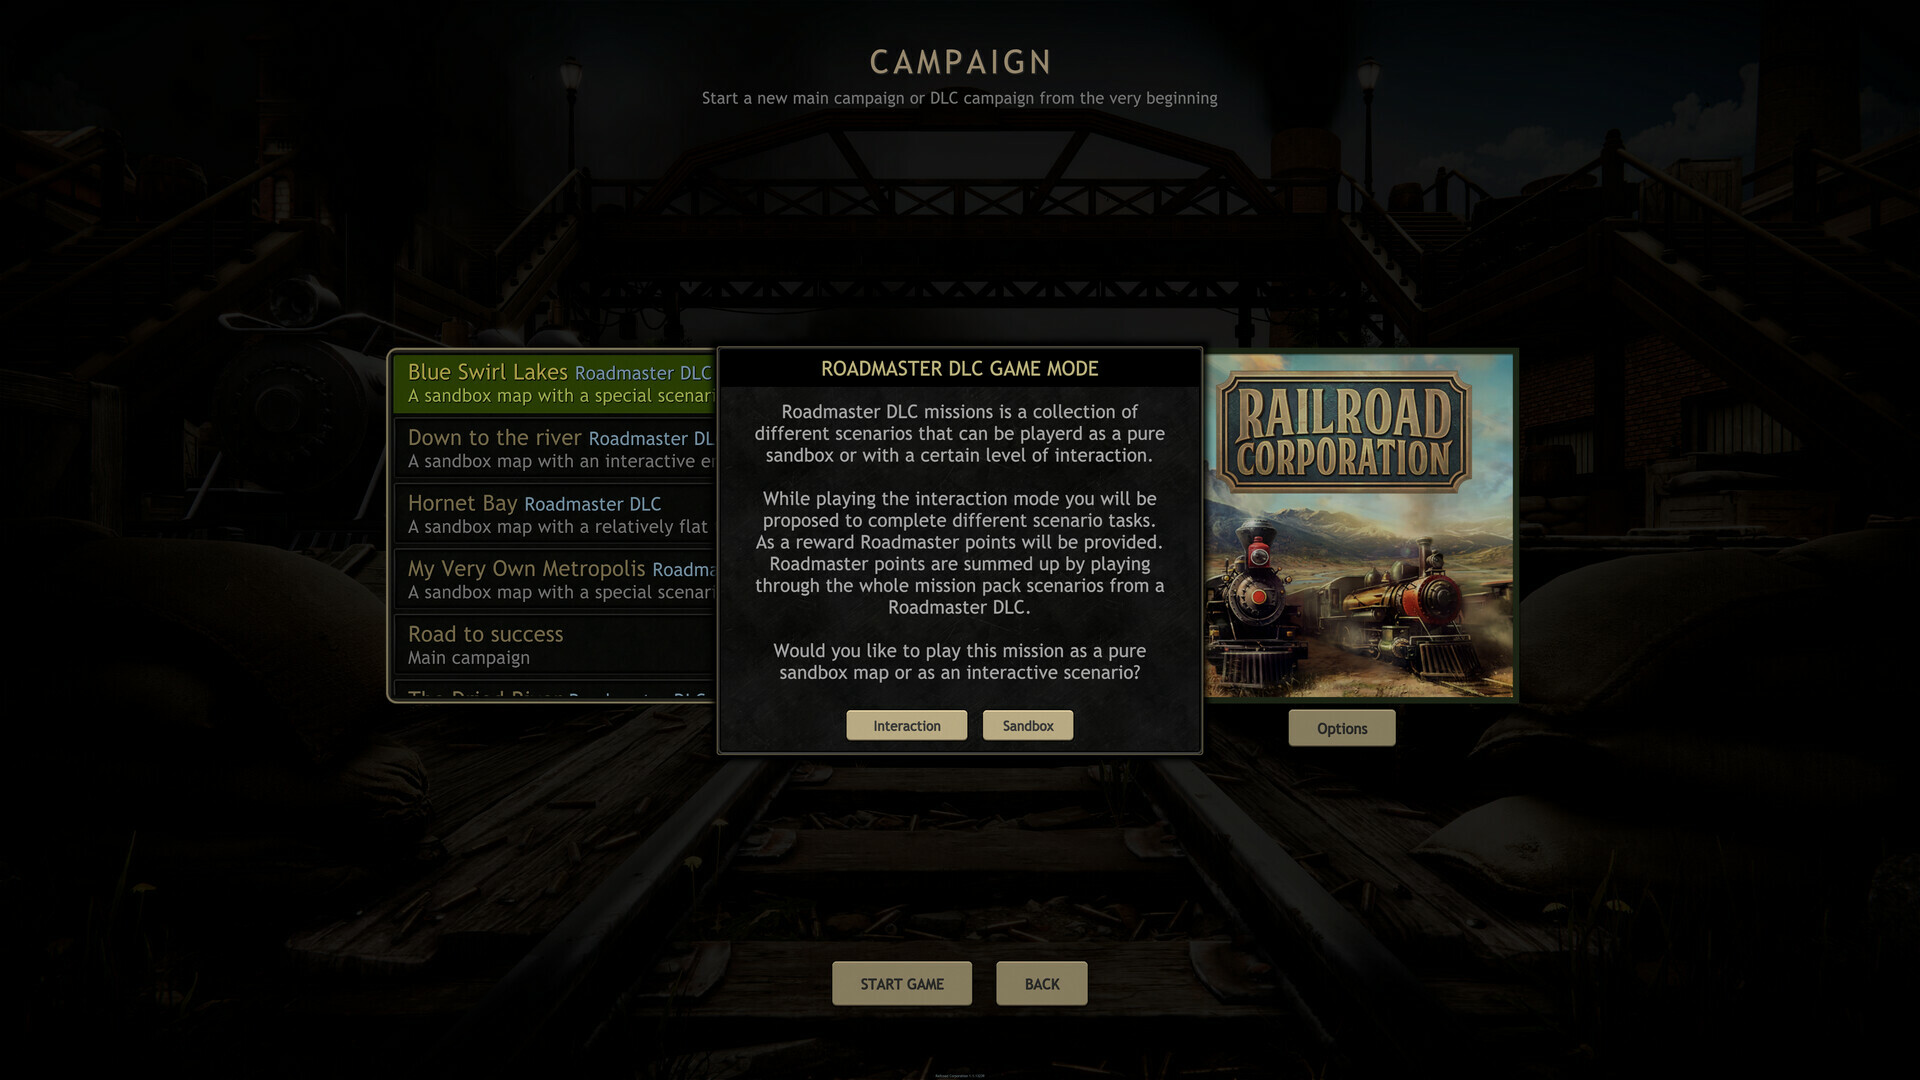 Completely different. Railroad Corporation. Duck and Cover Pack DLC.